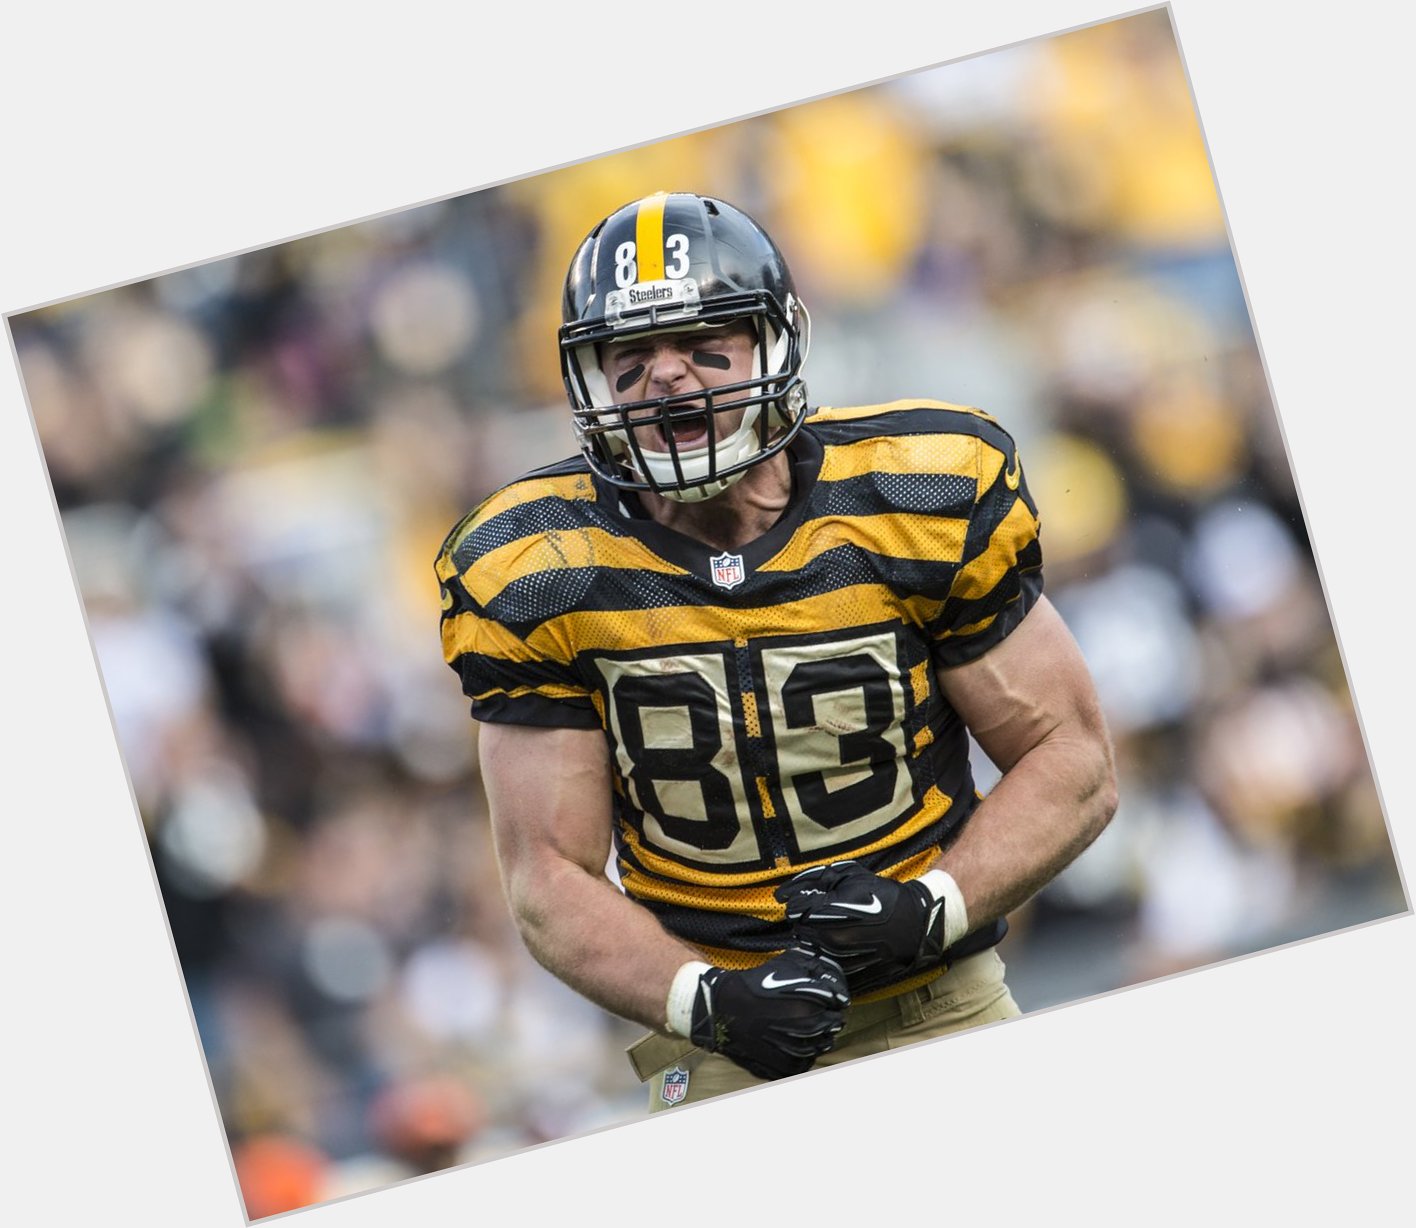 Happy Birthday to Heath Miller, who turns 35 today! 